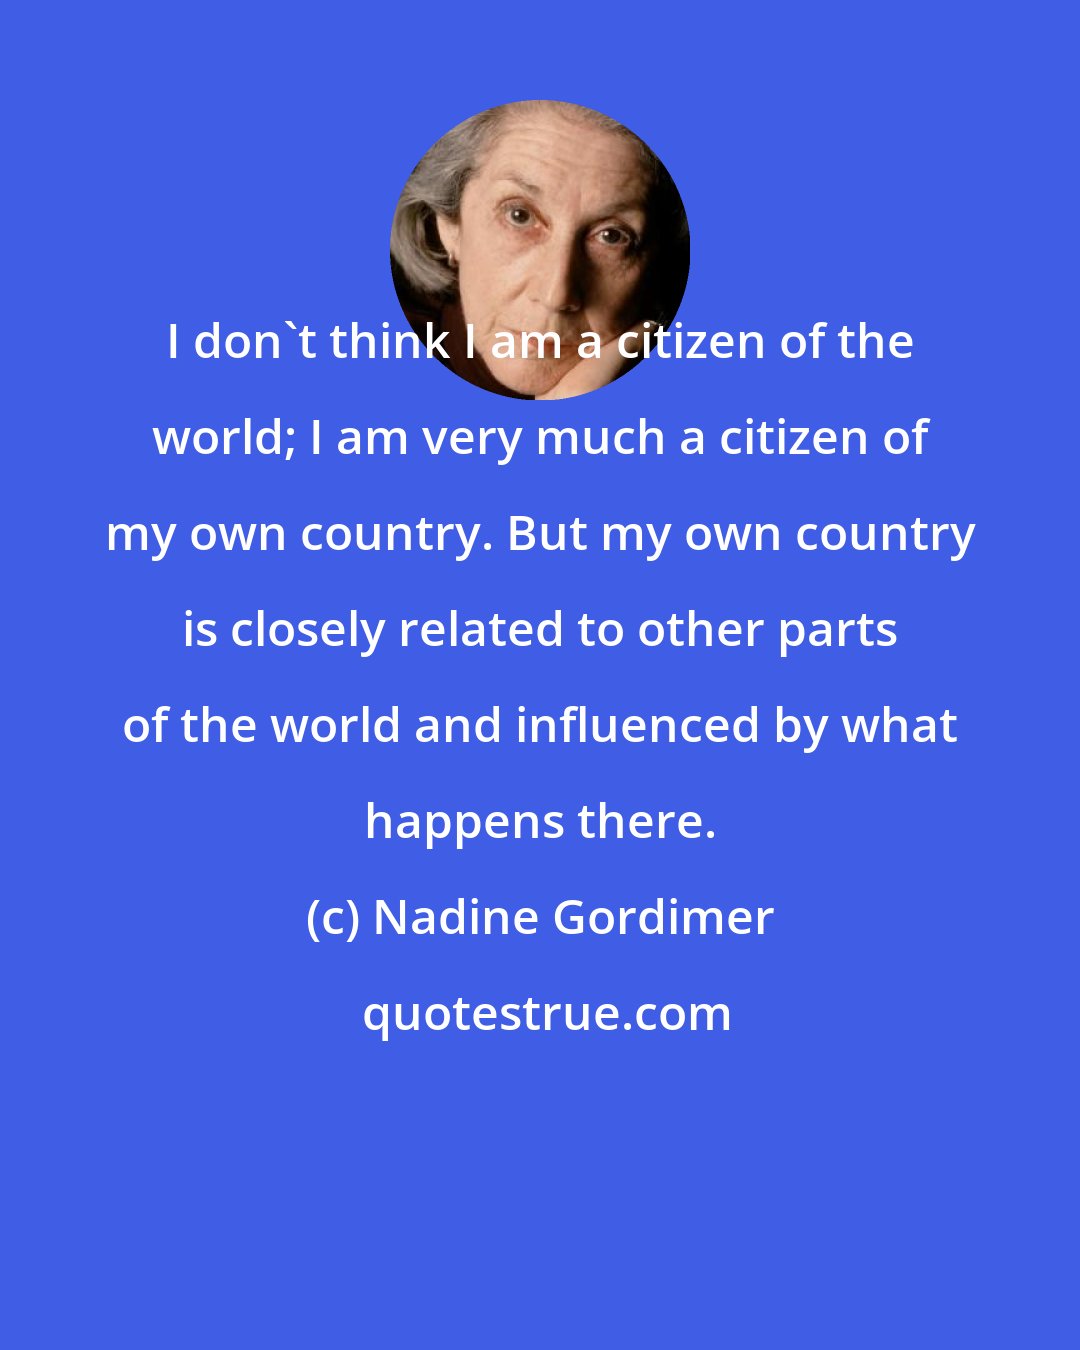 Nadine Gordimer: I don't think I am a citizen of the world; I am very much a citizen of my own country. But my own country is closely related to other parts of the world and influenced by what happens there.